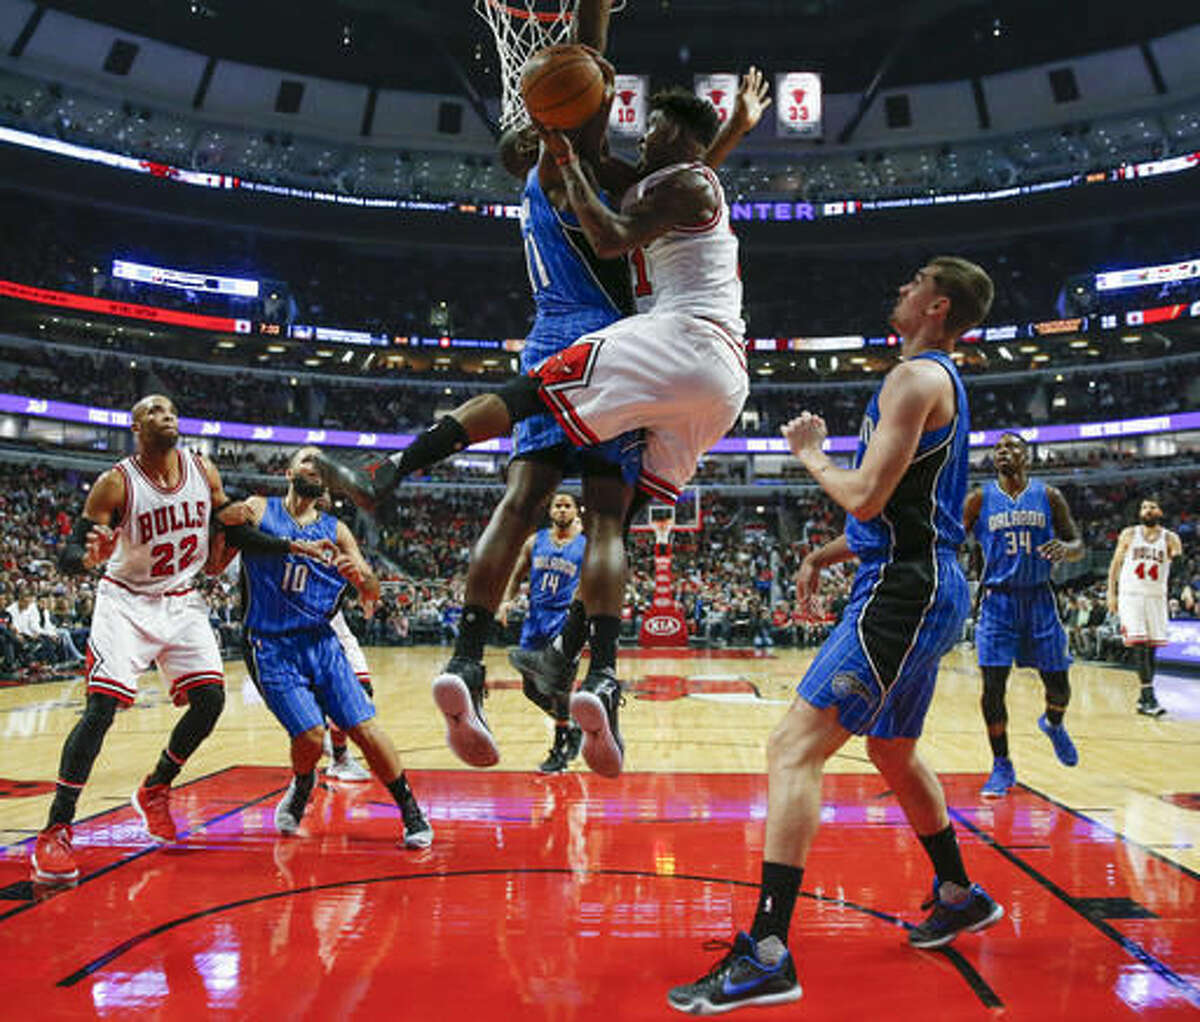 Chicago Bulls guard Jimmy Butler, right, goes to the basket against Orlando Magic center Bismack Biyombo, left, during the first half of an NBA basketball game, Monday, Nov. 7, 2016, in Chicago. (AP Photo/Kamil Krzaczynski)